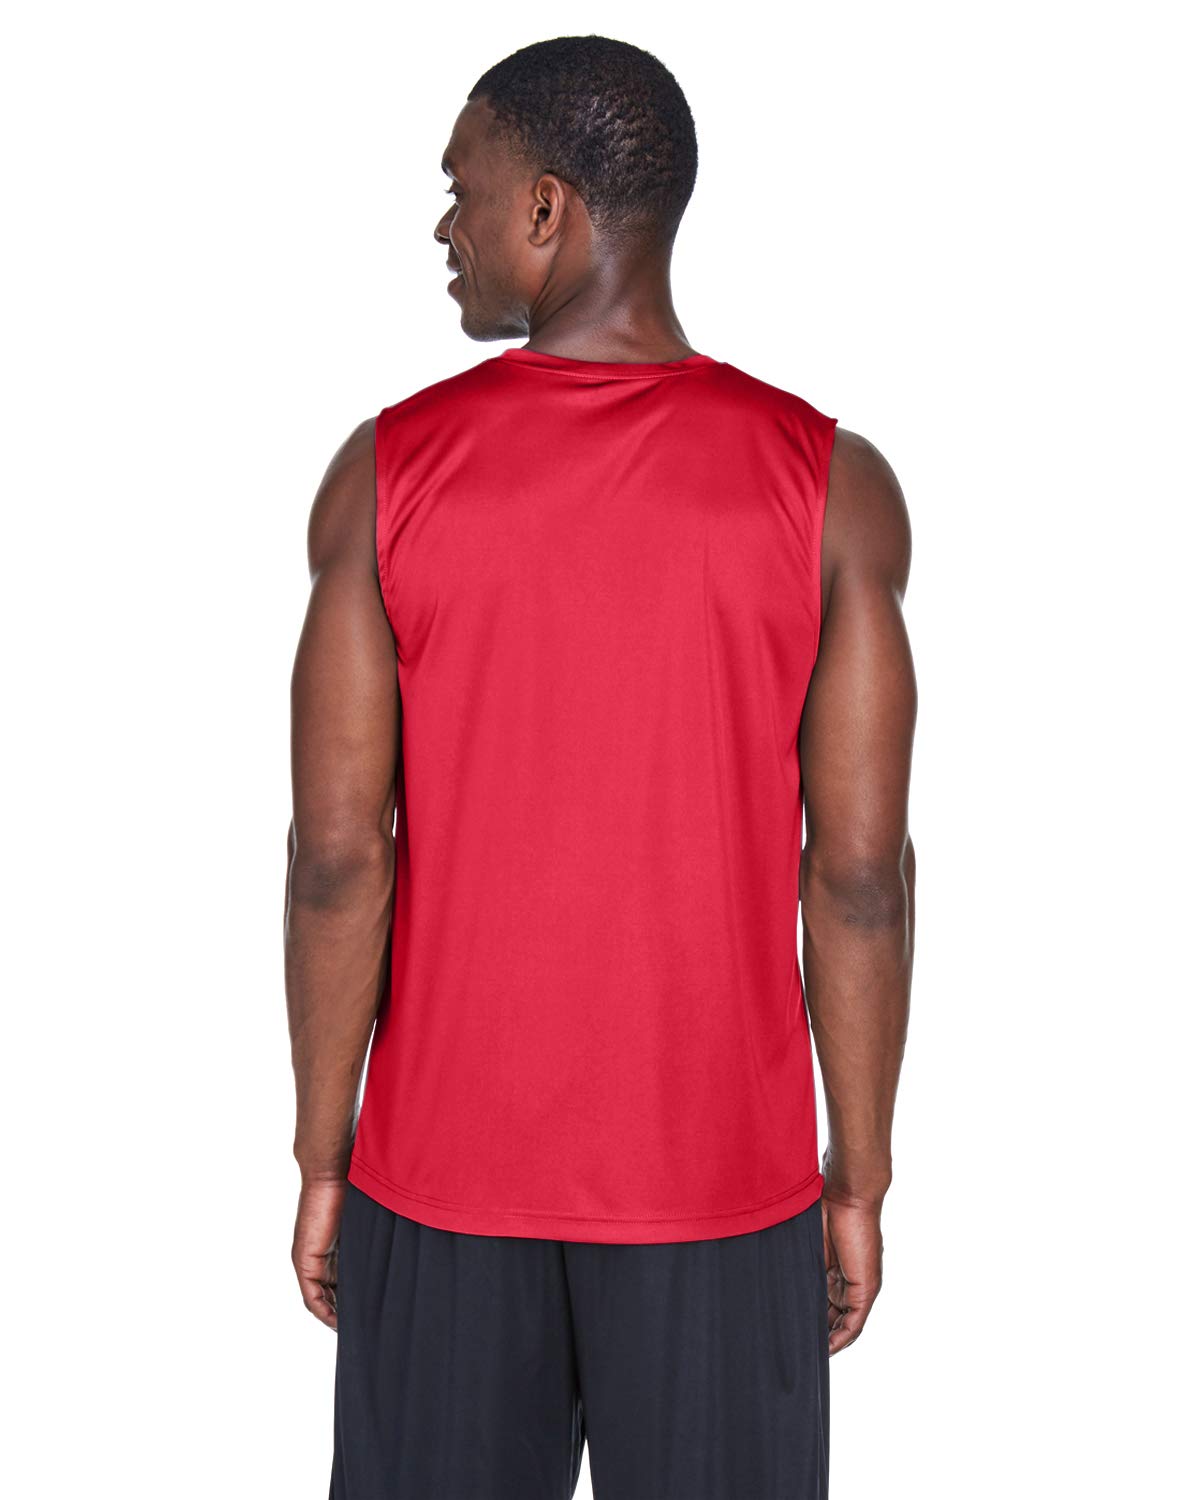 LIFEGUARD Officially Licensed Mens Performance Active Muscle Tank Moisture Wicking